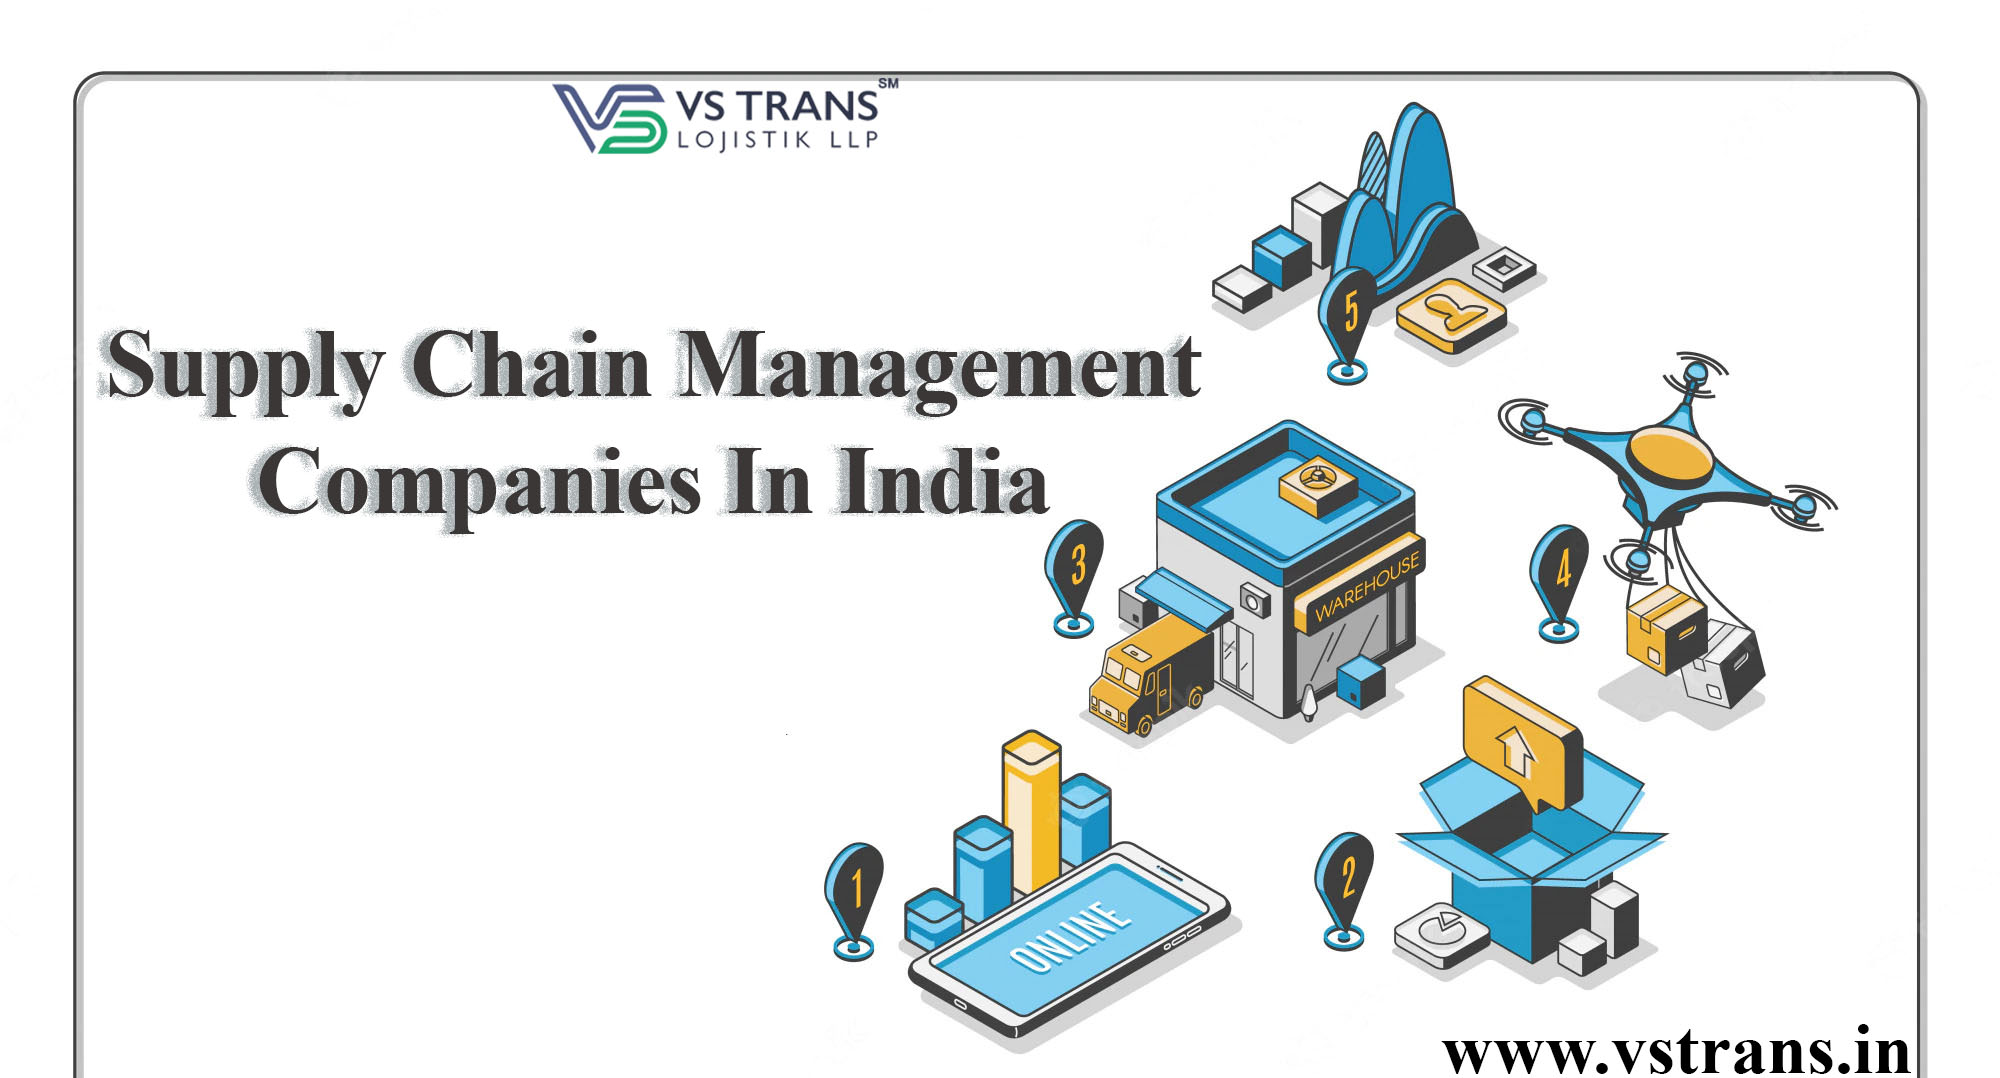 Supply Chain Management Companies In India